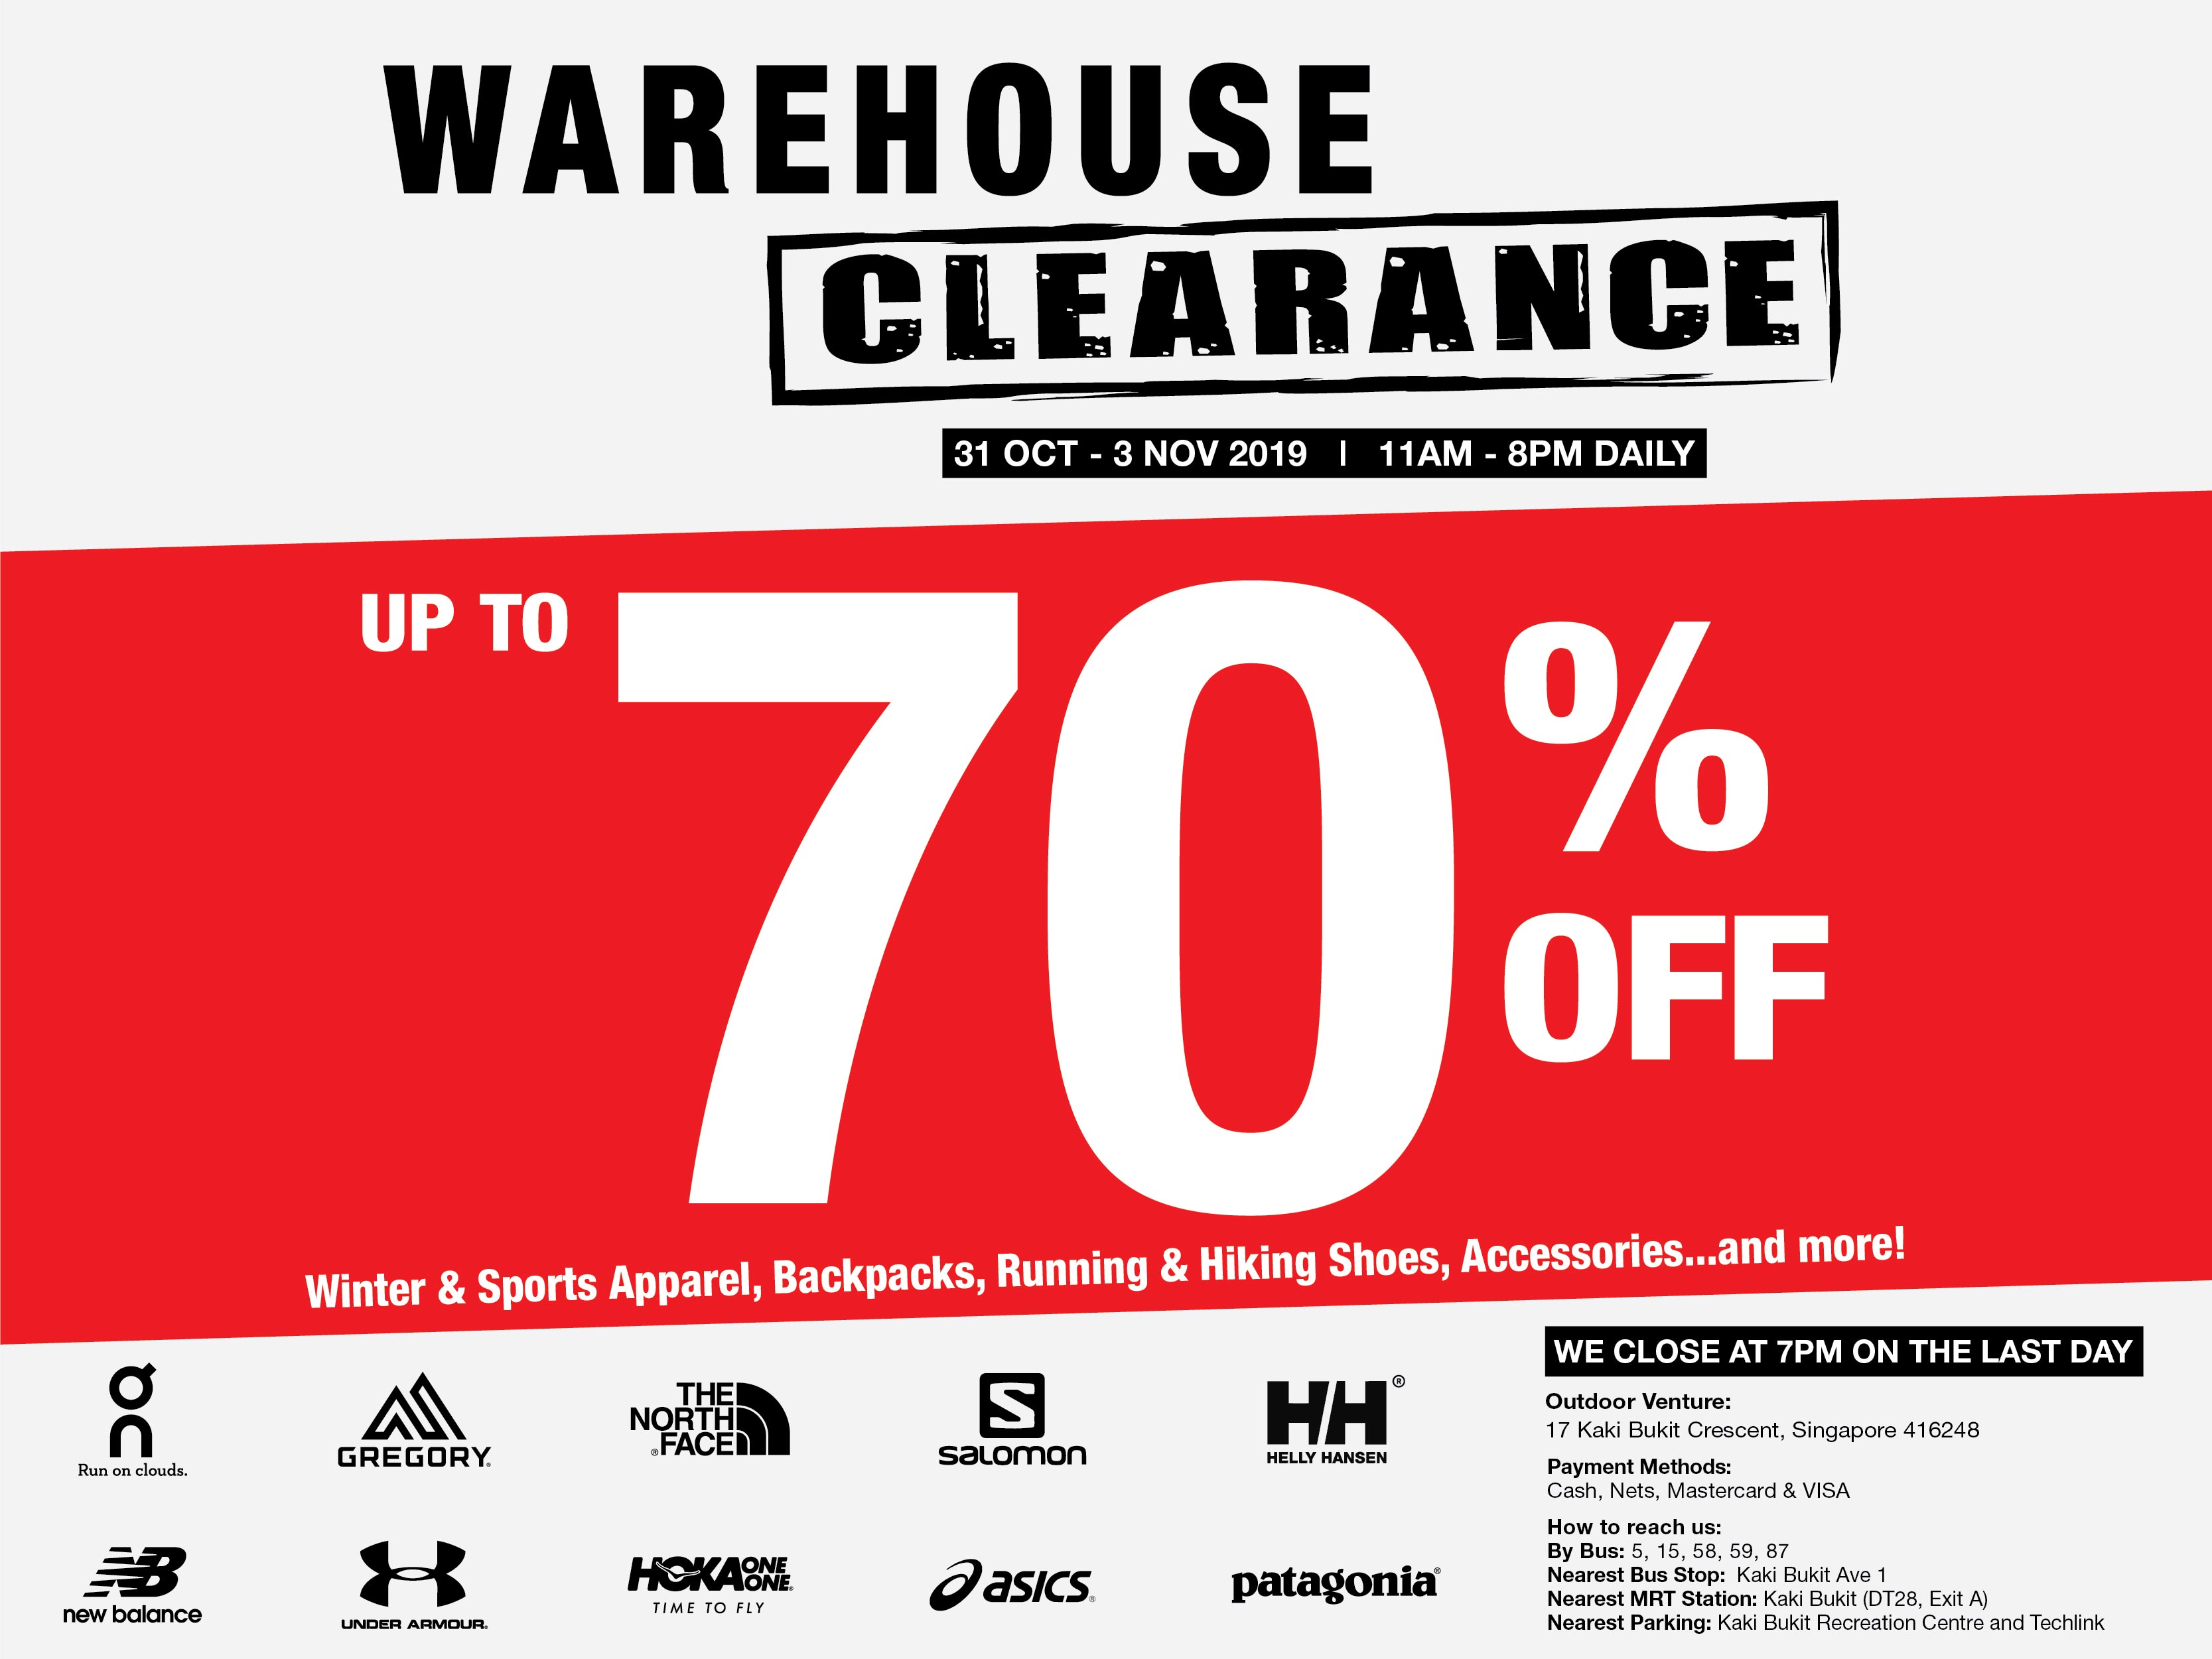 Warehouse clearance sale at Kaki Bukit has up to 70% off sporting and outdoor gears from Under Armour, The North Face, Asics & More - 1